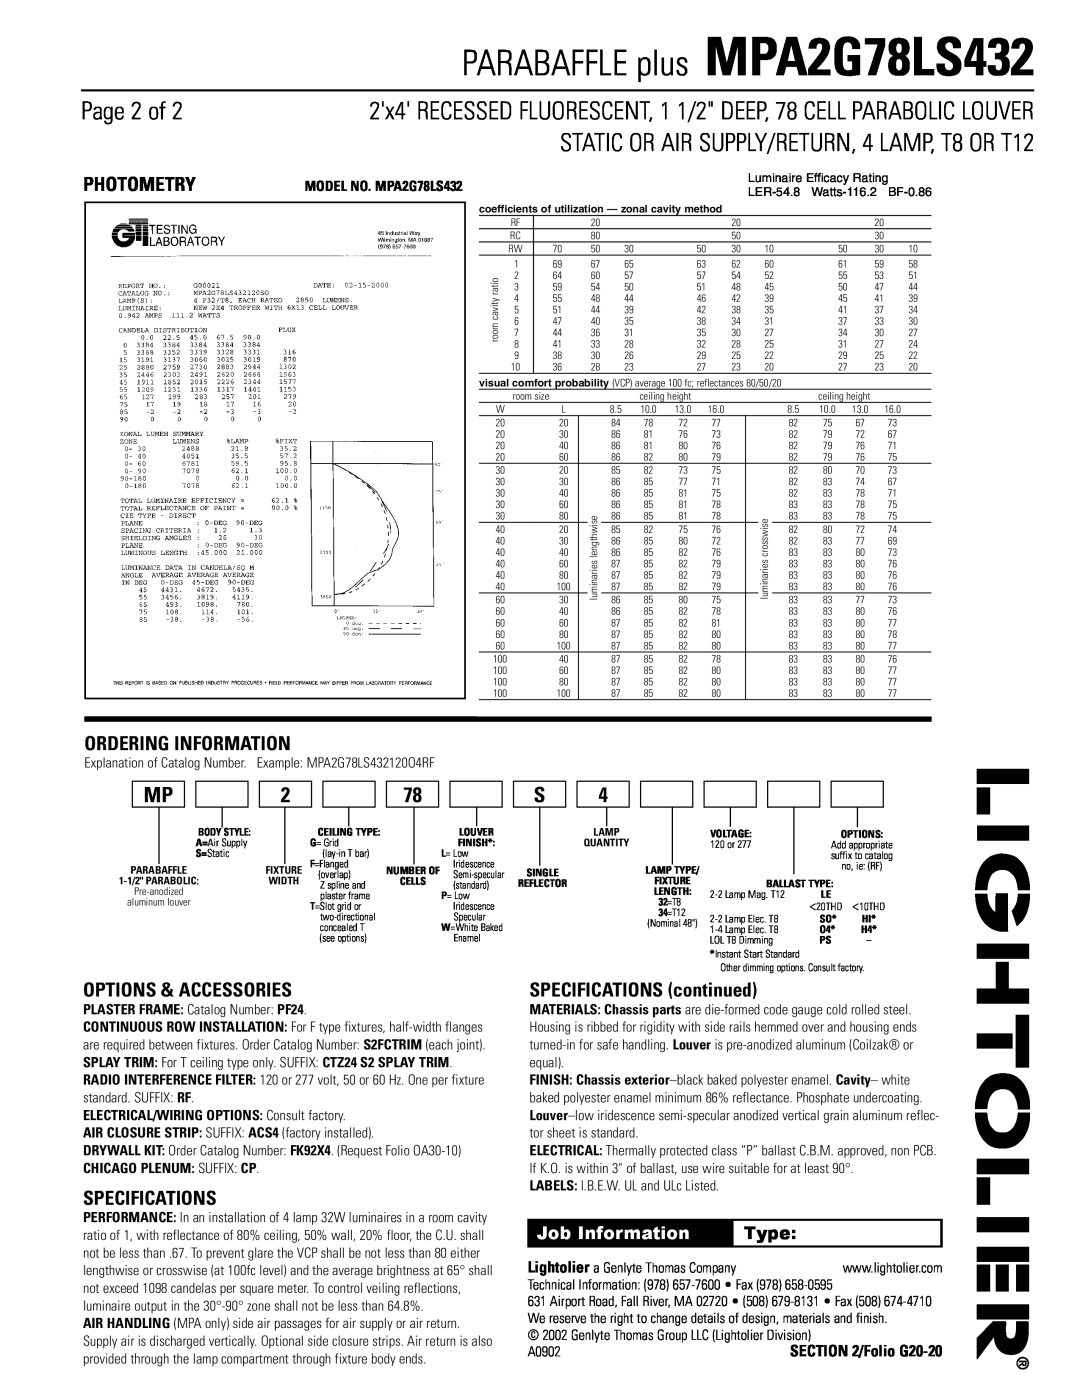 Lightolier MPA2G78LS432 dimensions Page 2 of, Photometry, Ordering Information, Options & Accessories, Specifications, Type 